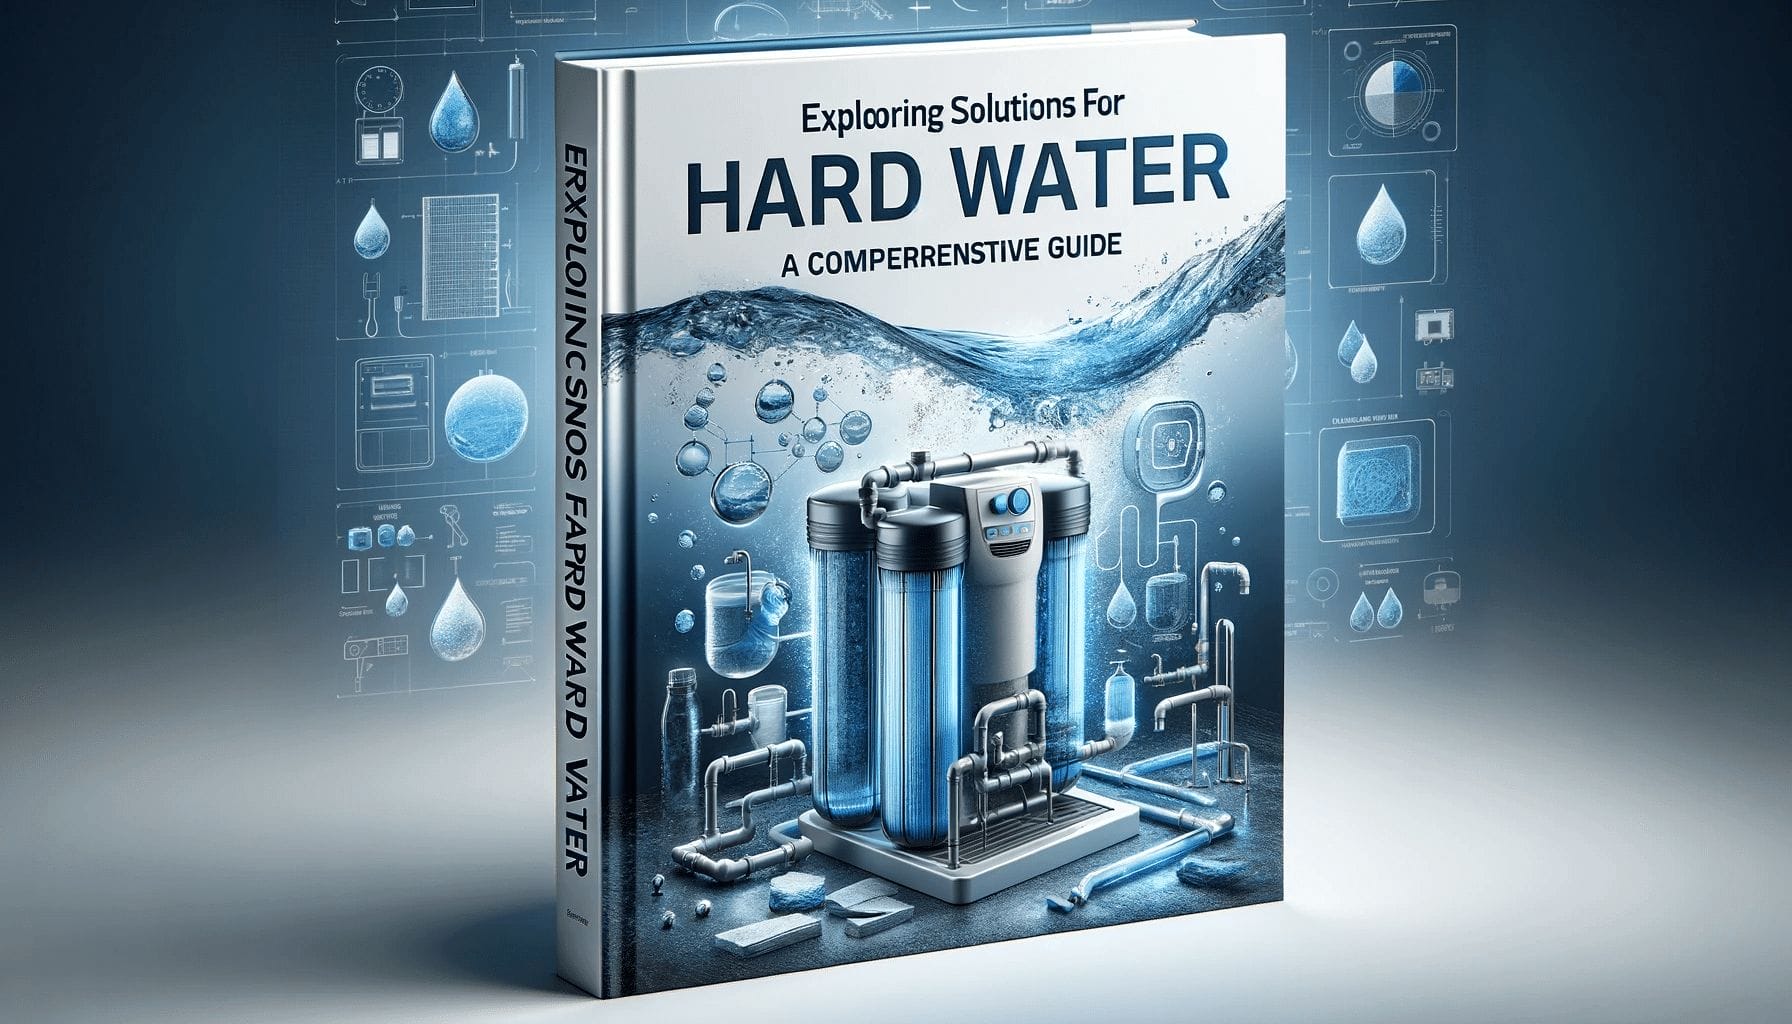 A book cover for hard water treatment systems.